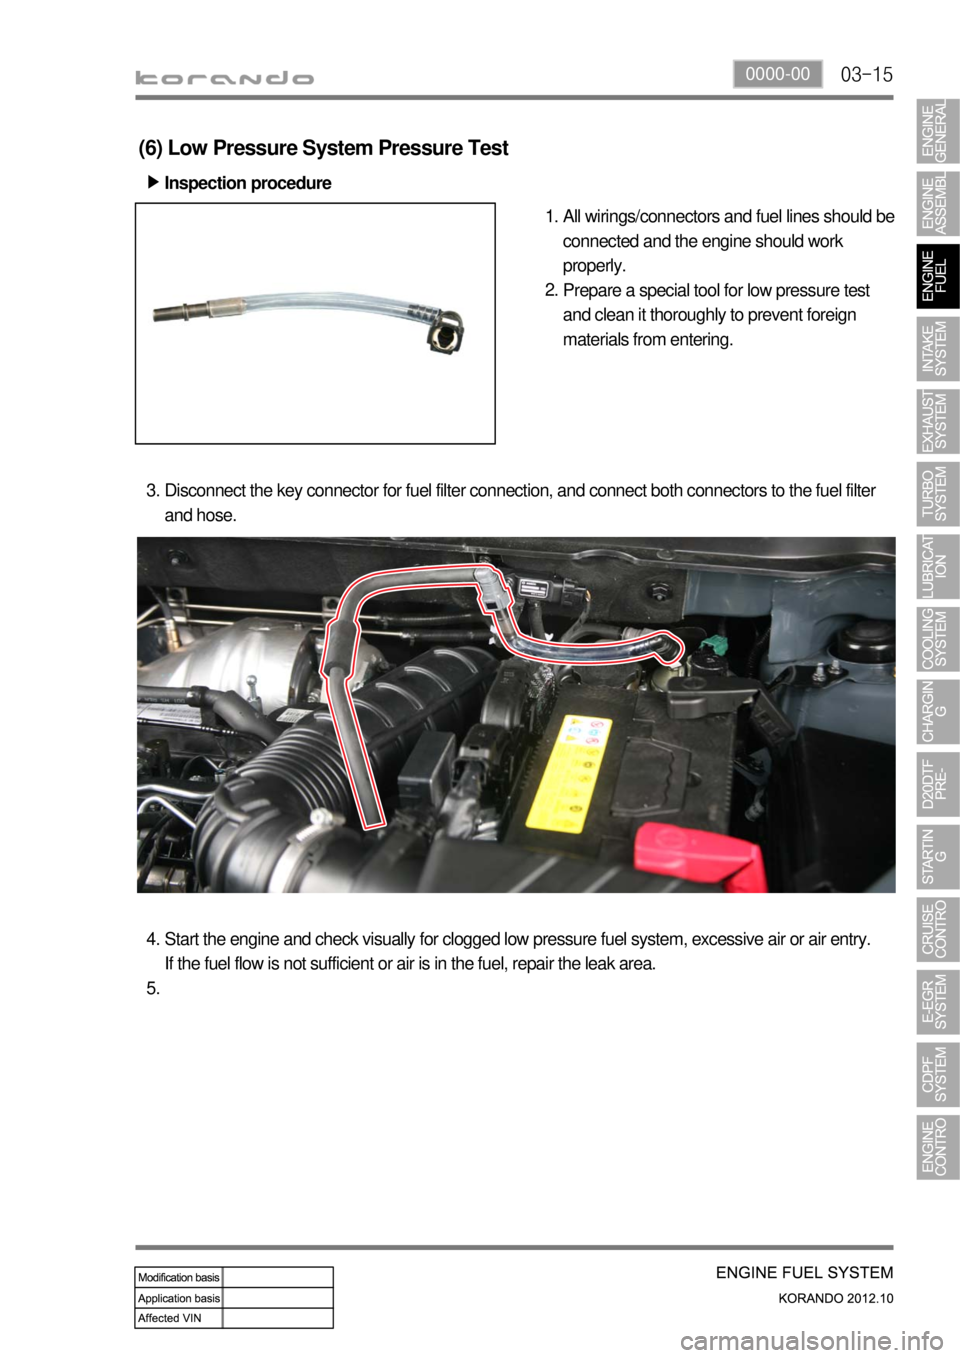 SSANGYONG KORANDO 2012  Service Manual 03-150000-00
(6) Low Pressure System Pressure Test
Inspection procedure ▶
All wirings/connectors and fuel lines should be 
connected and the engine should work 
properly.
Prepare a special tool for 